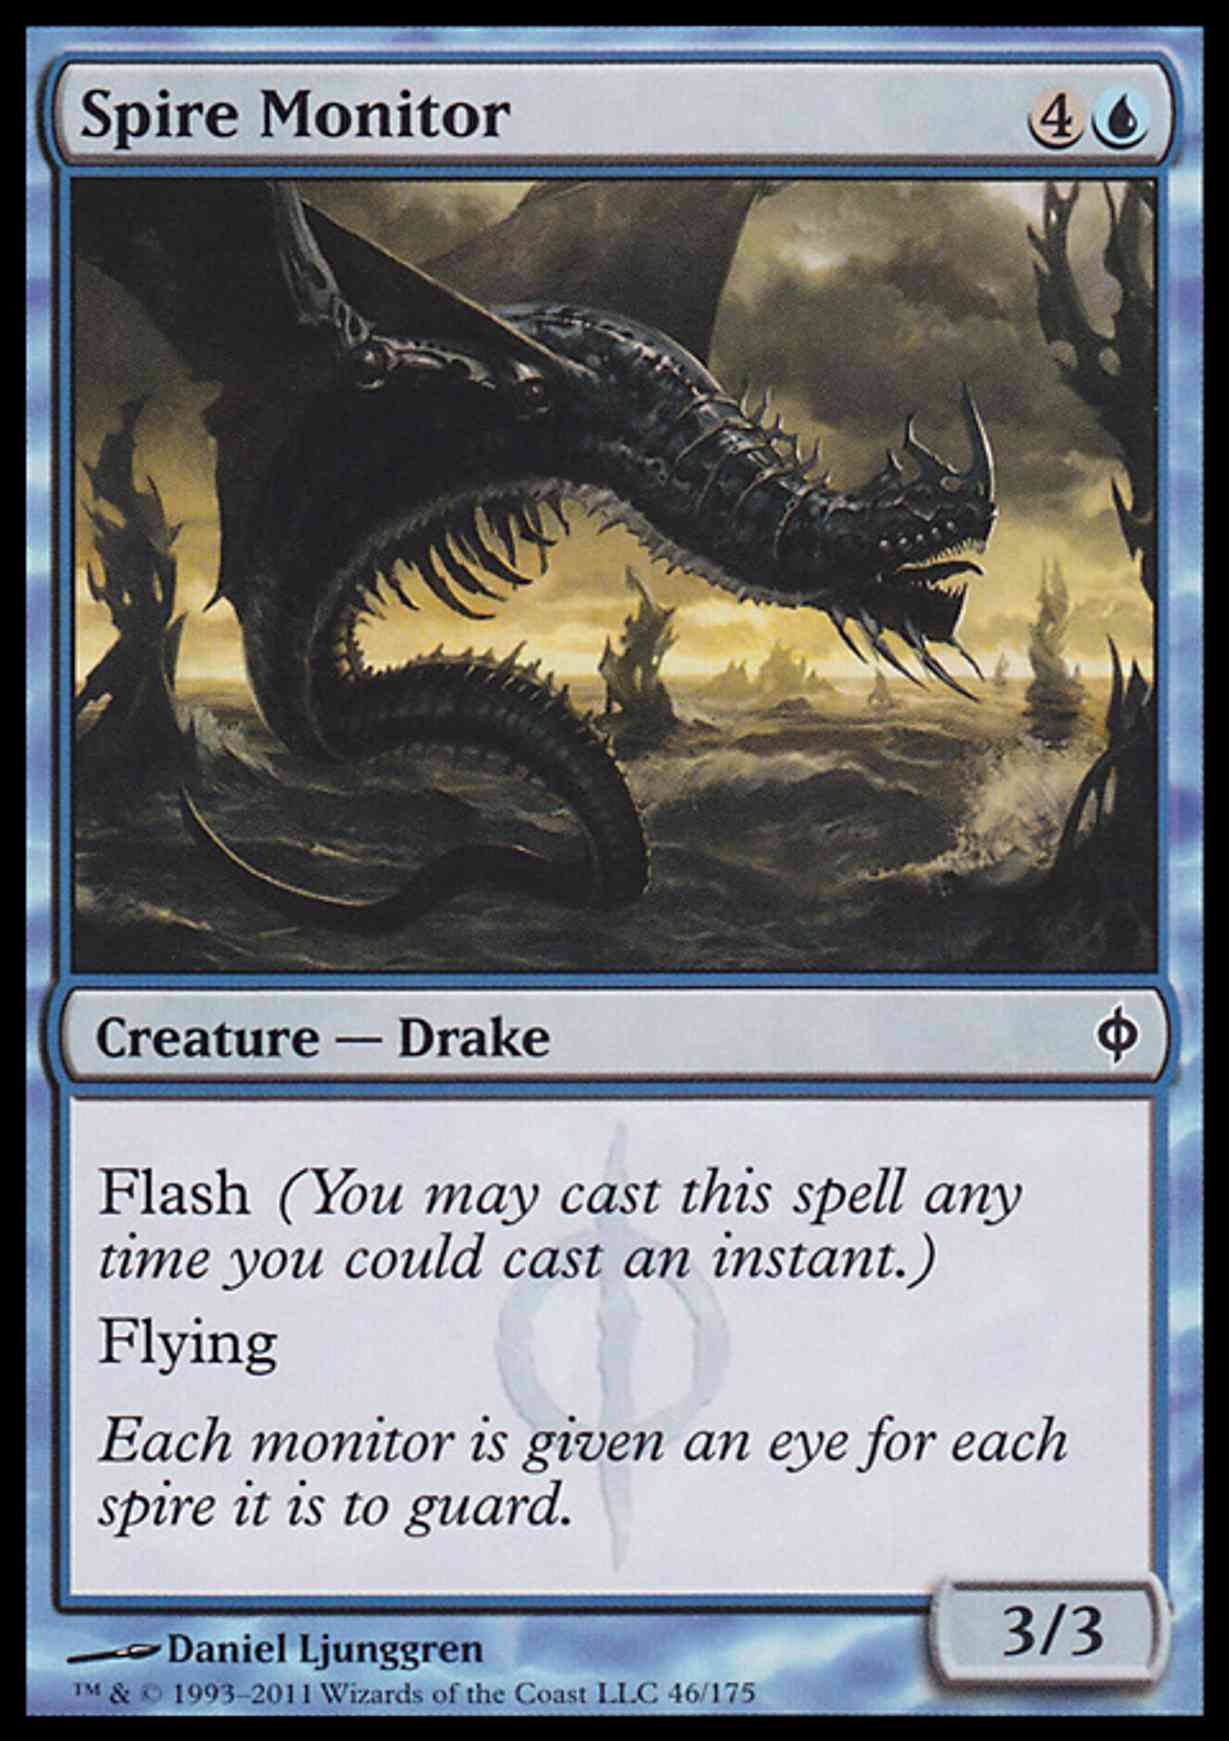 Spire Monitor magic card front